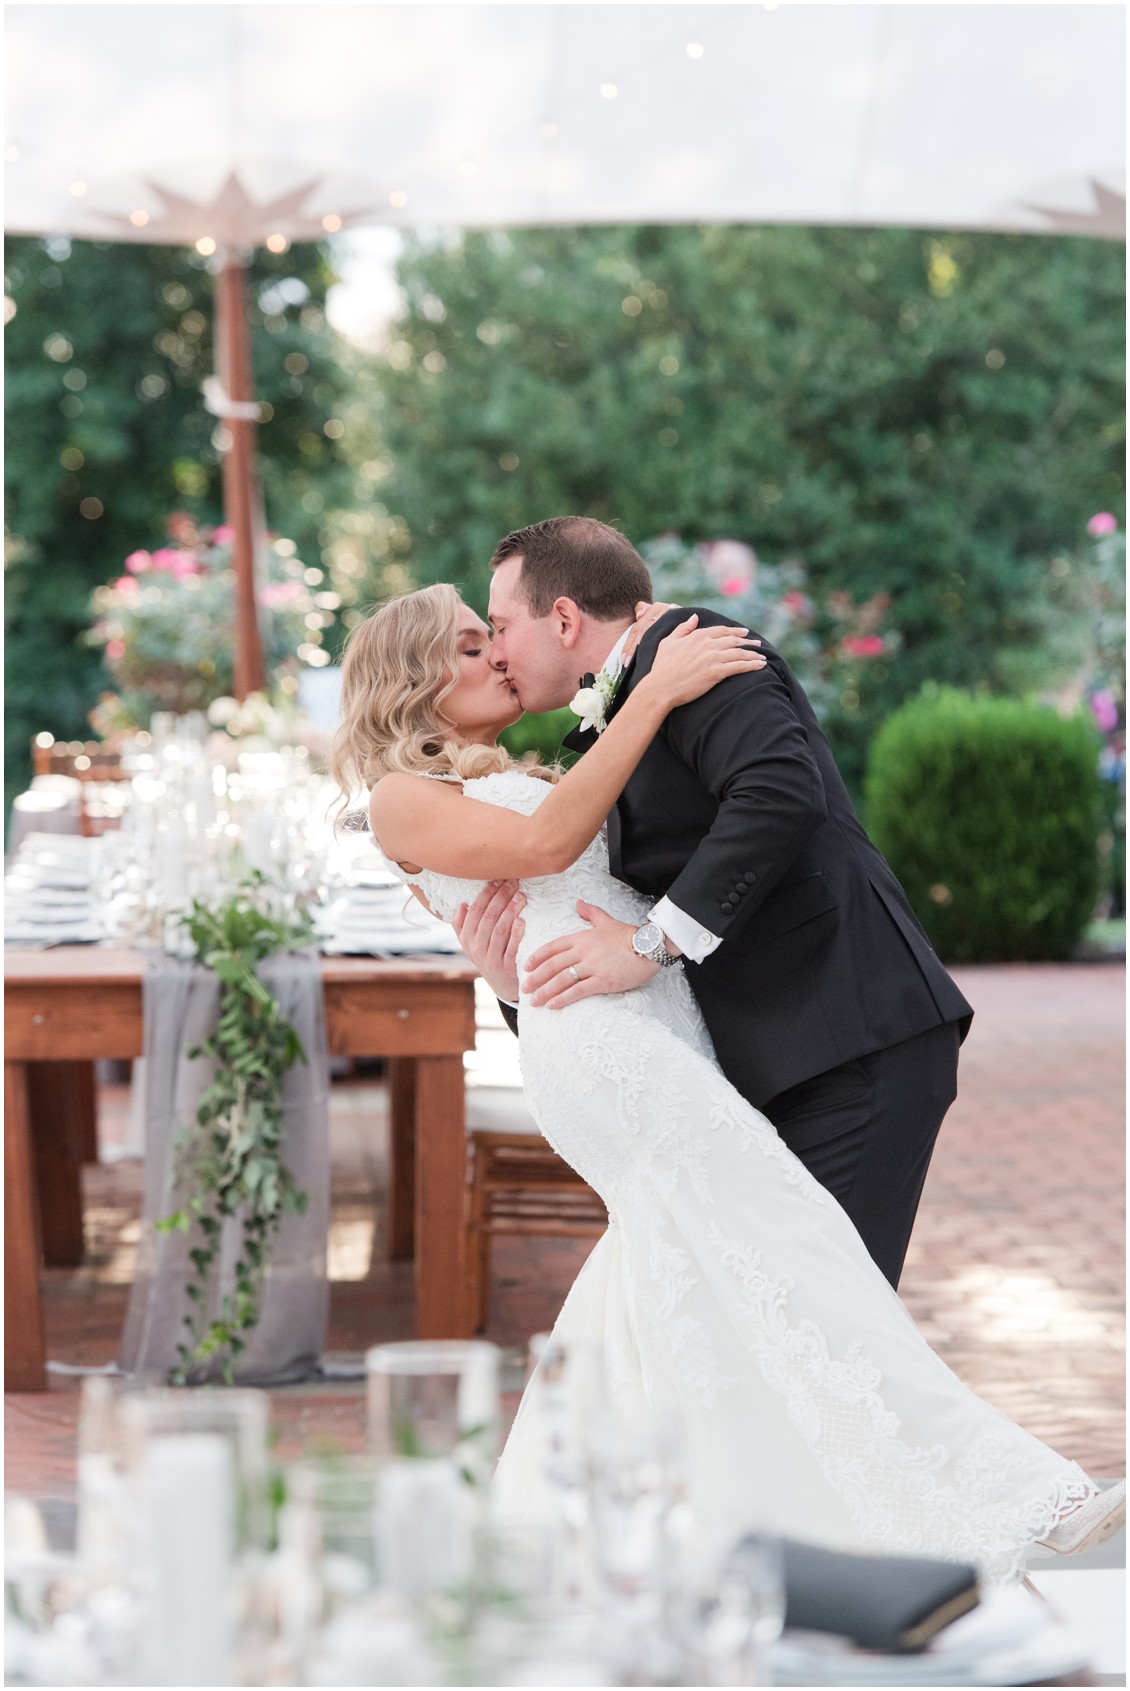 Bride and Groom dancing | Brittland Manor | Rob Korb | Eastern Shore Tents and Events | My Eastern Shore Wedding 